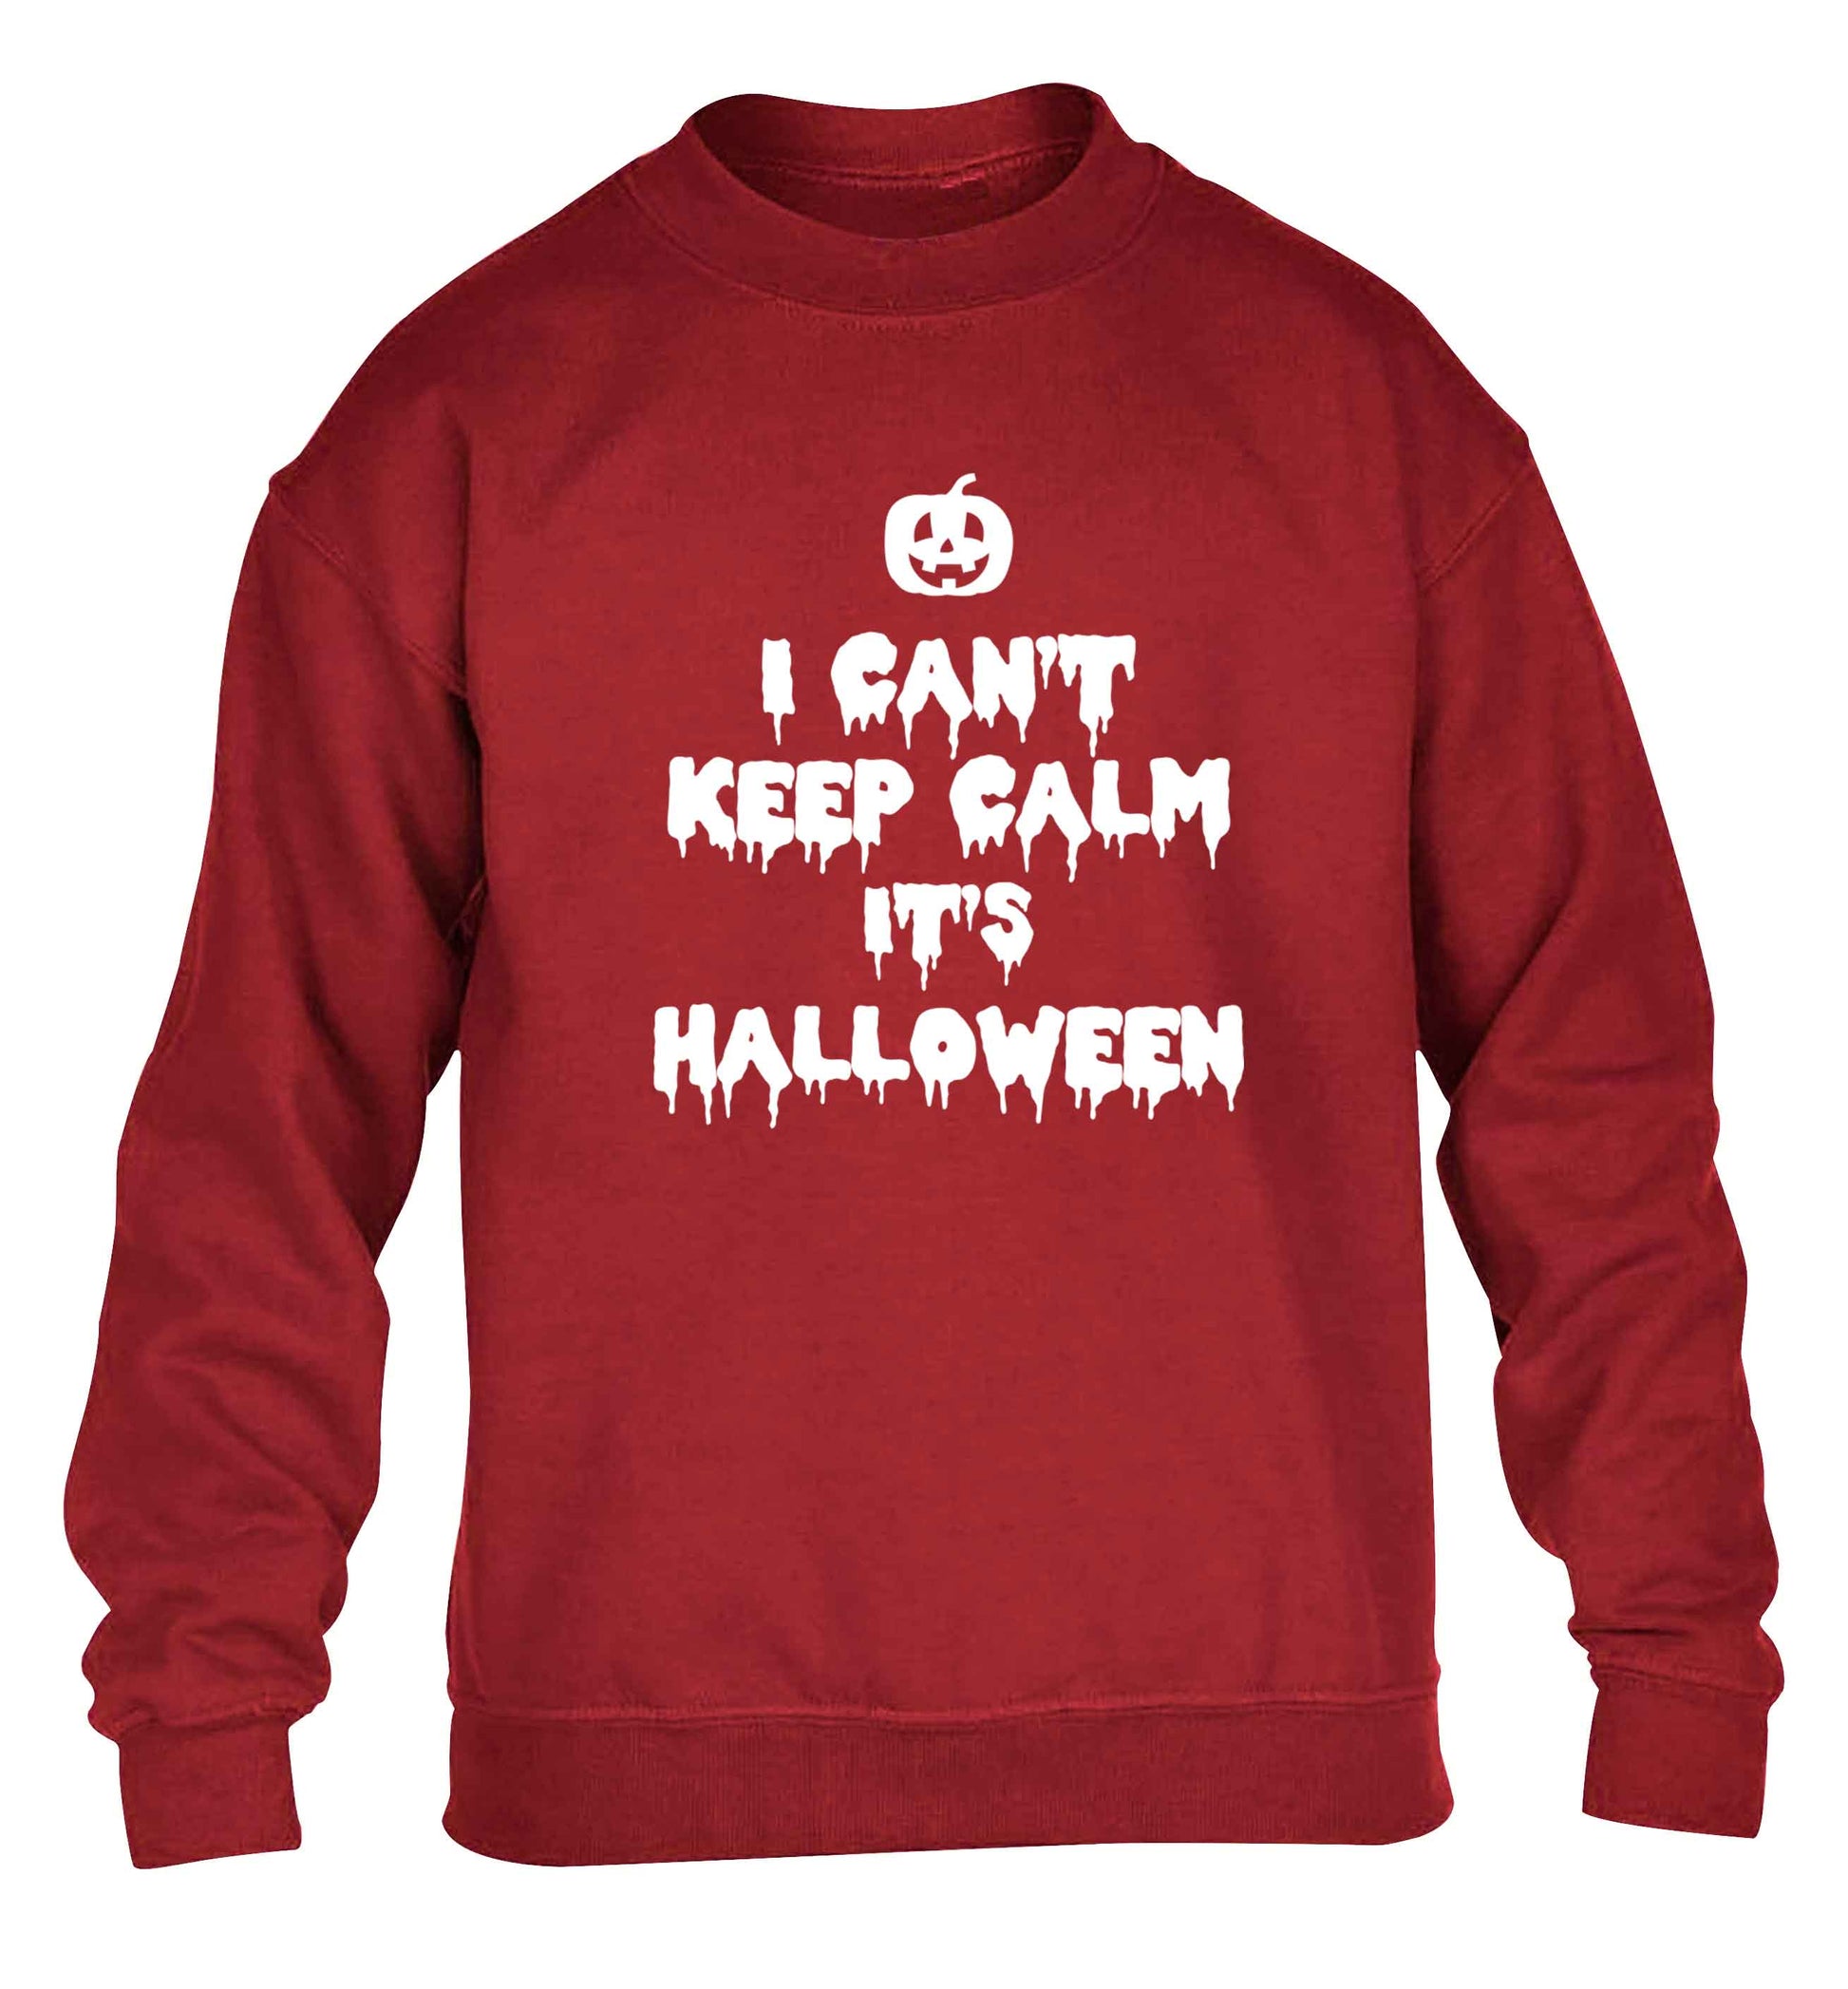 I can't keep calm it's halloween children's grey sweater 12-13 Years